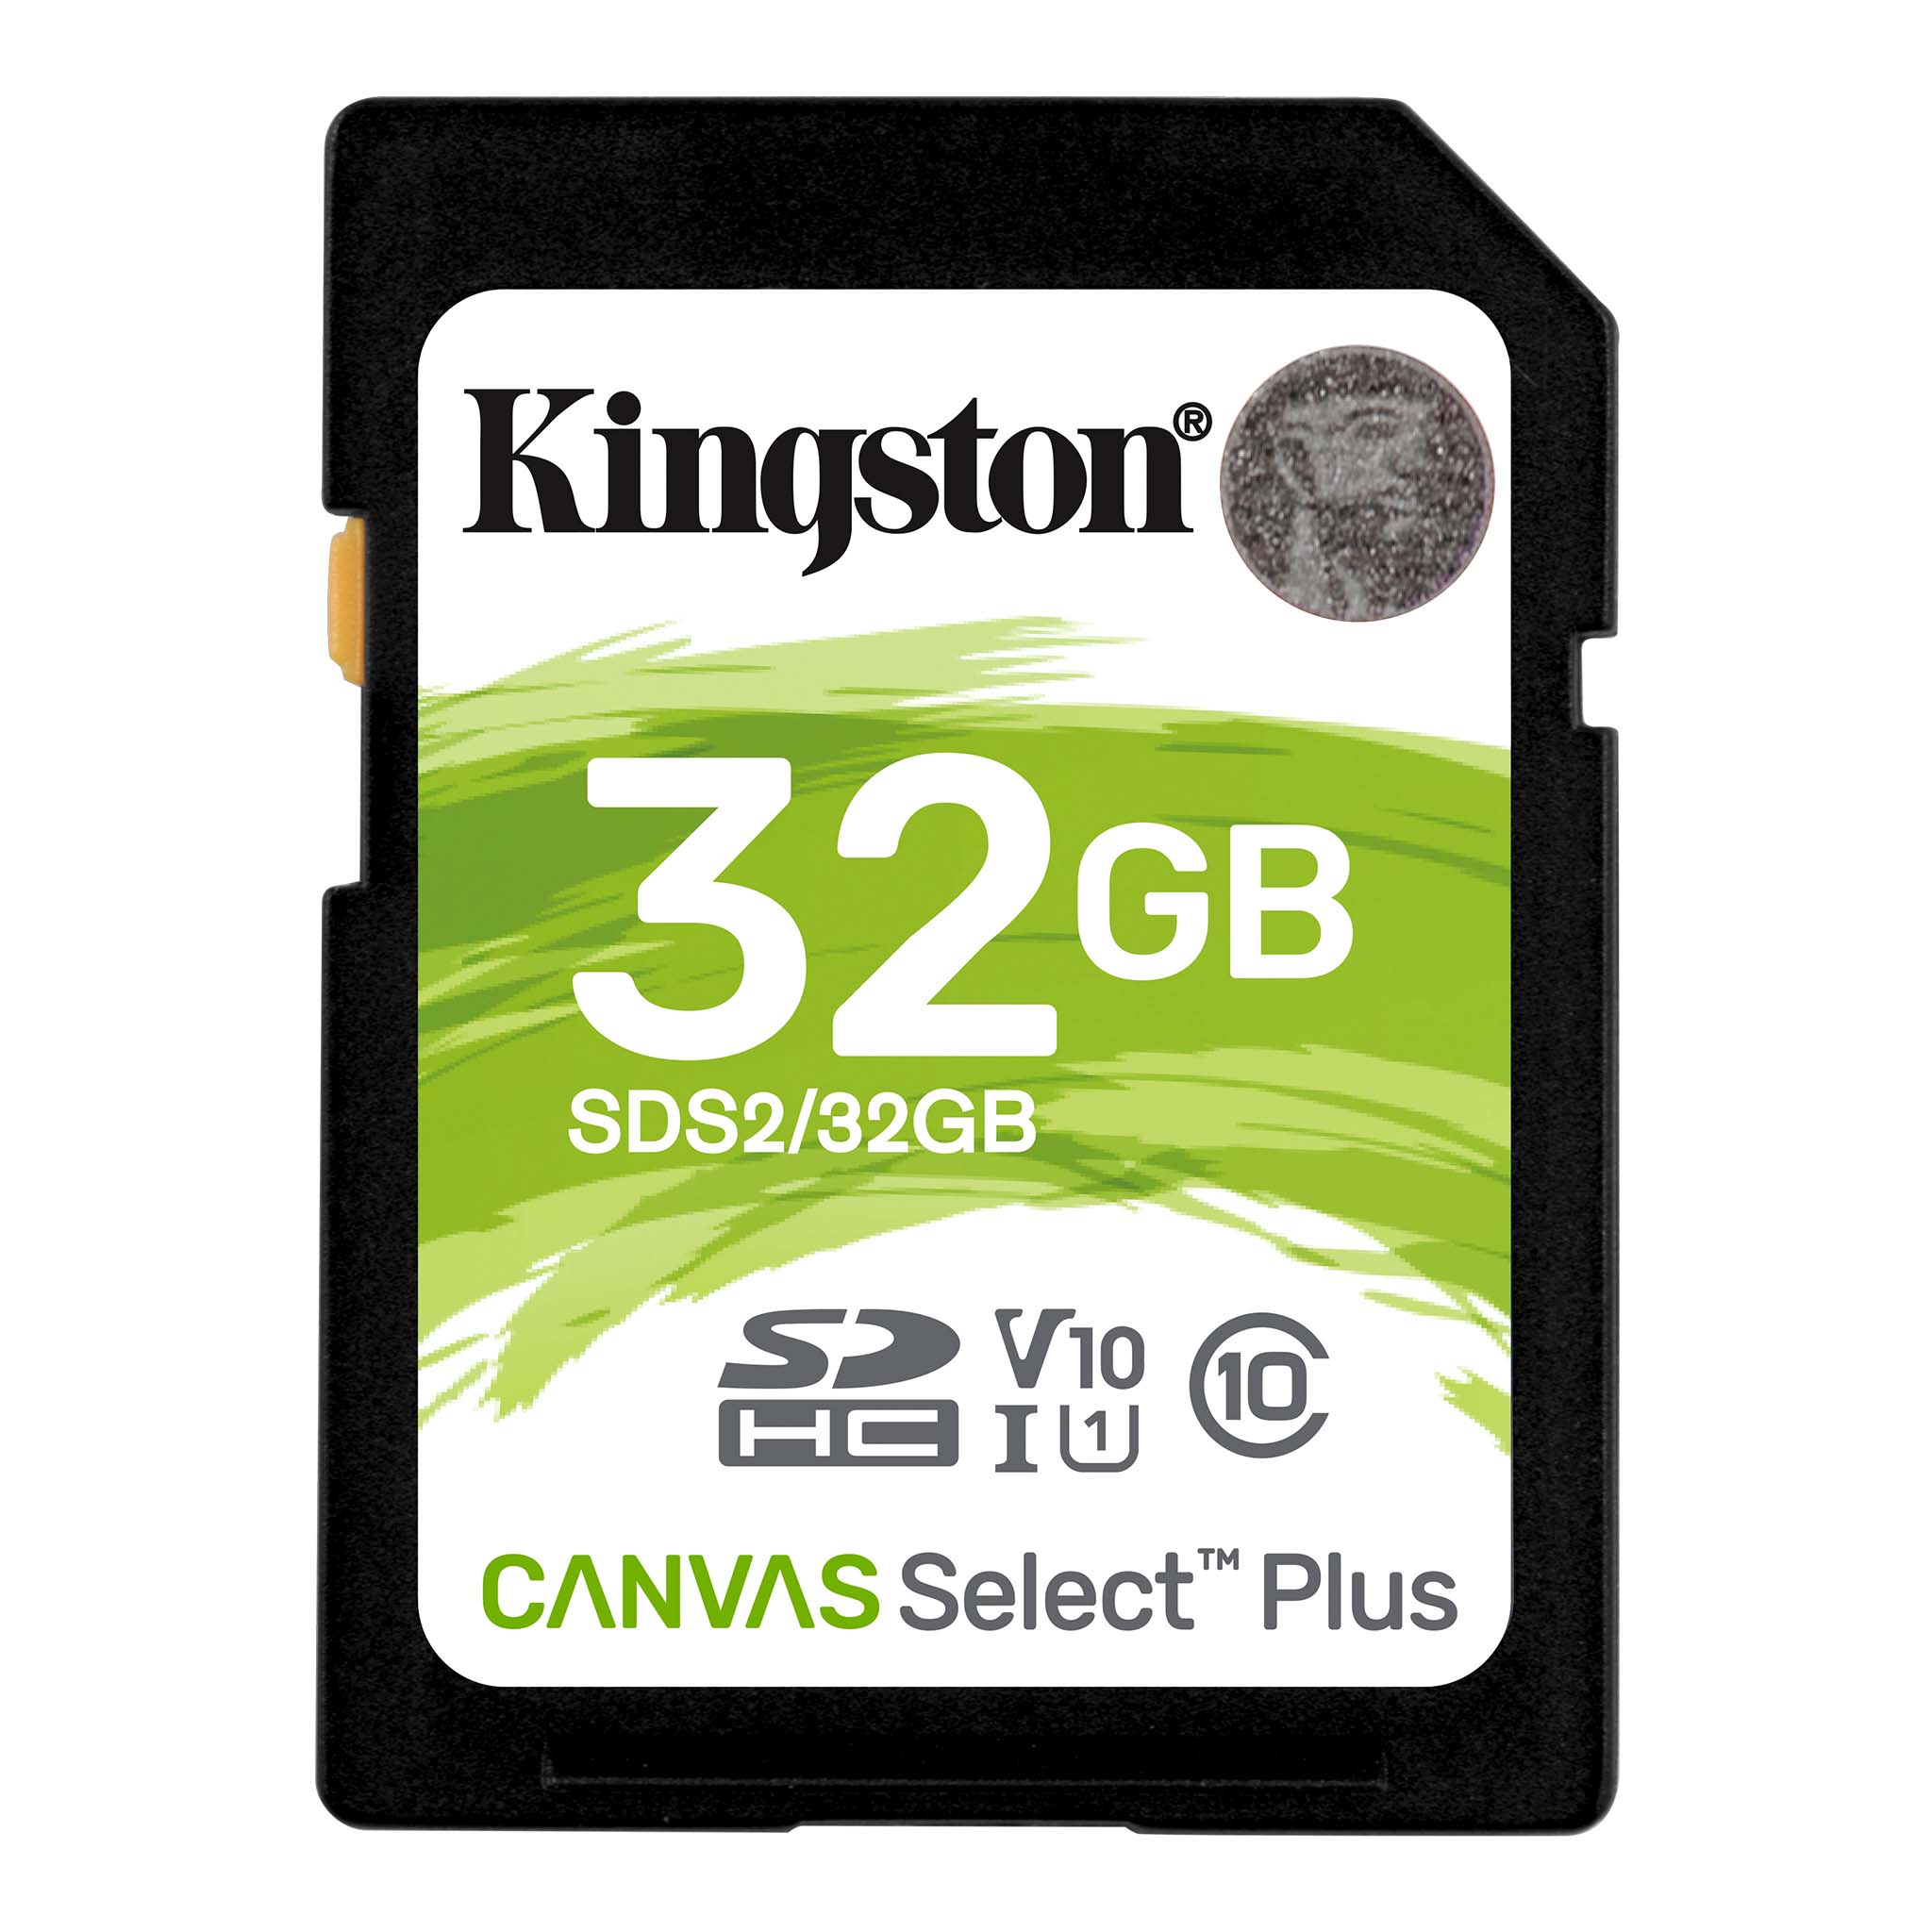 Kingston 128GB Huawei VKY-L29 MicroSDXC Canvas Select Plus Card Verified by SanFlash. 100MBs Works with Kingston 